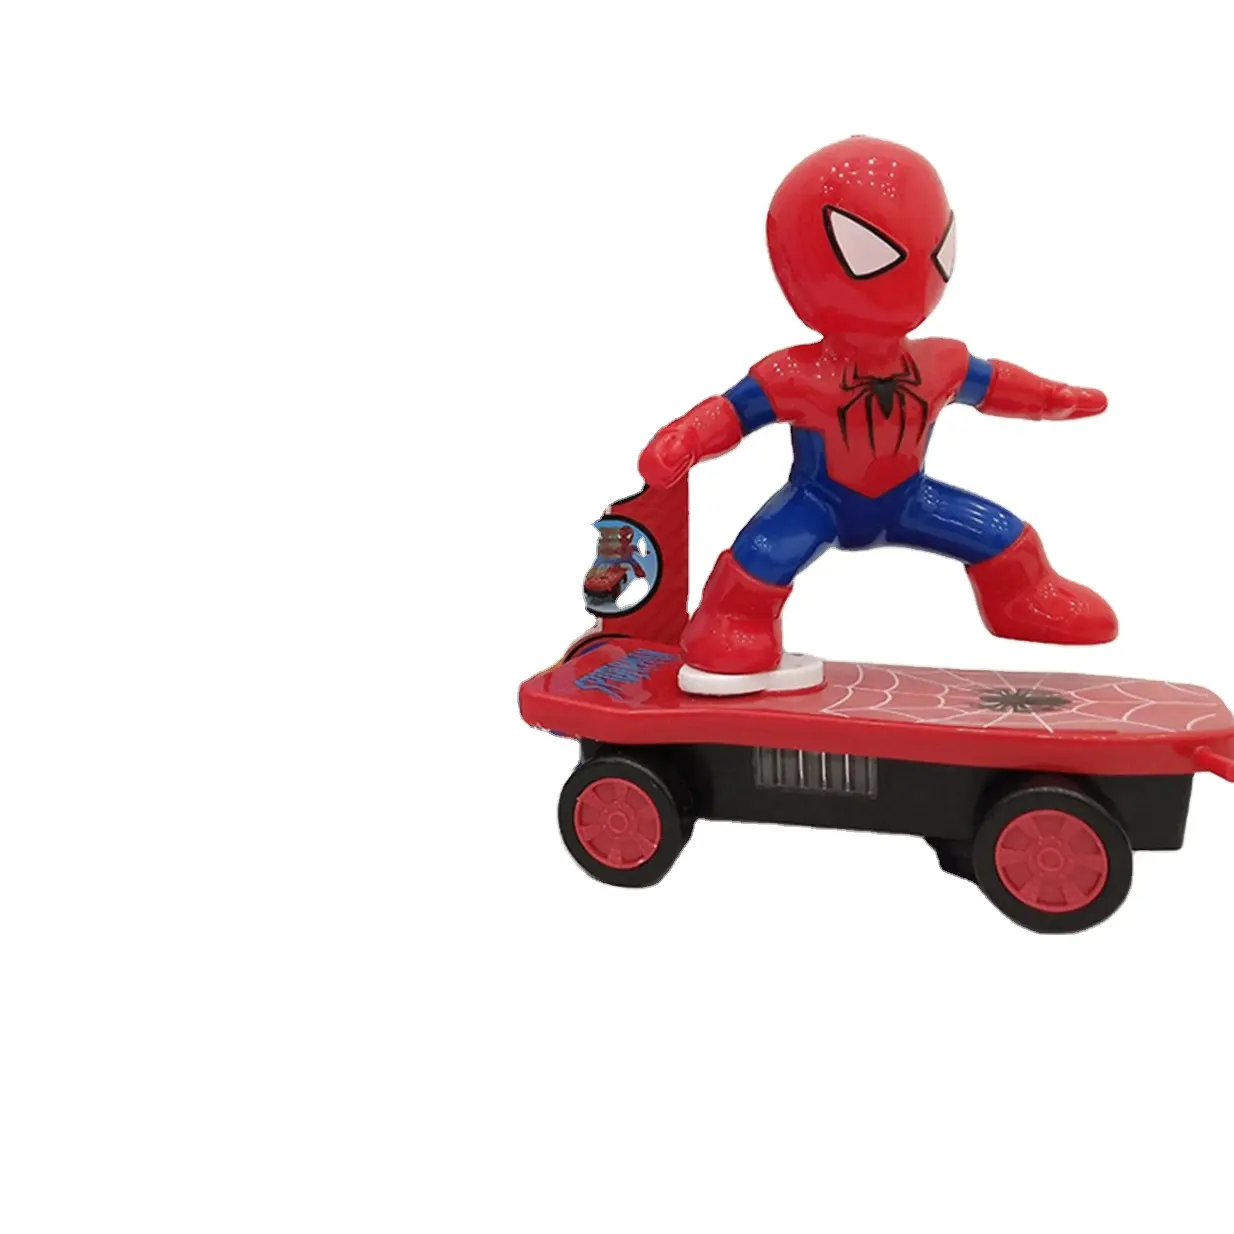 Spiderman Electronic Stunt Scooter Skateboard 360 Rotation Remote control 